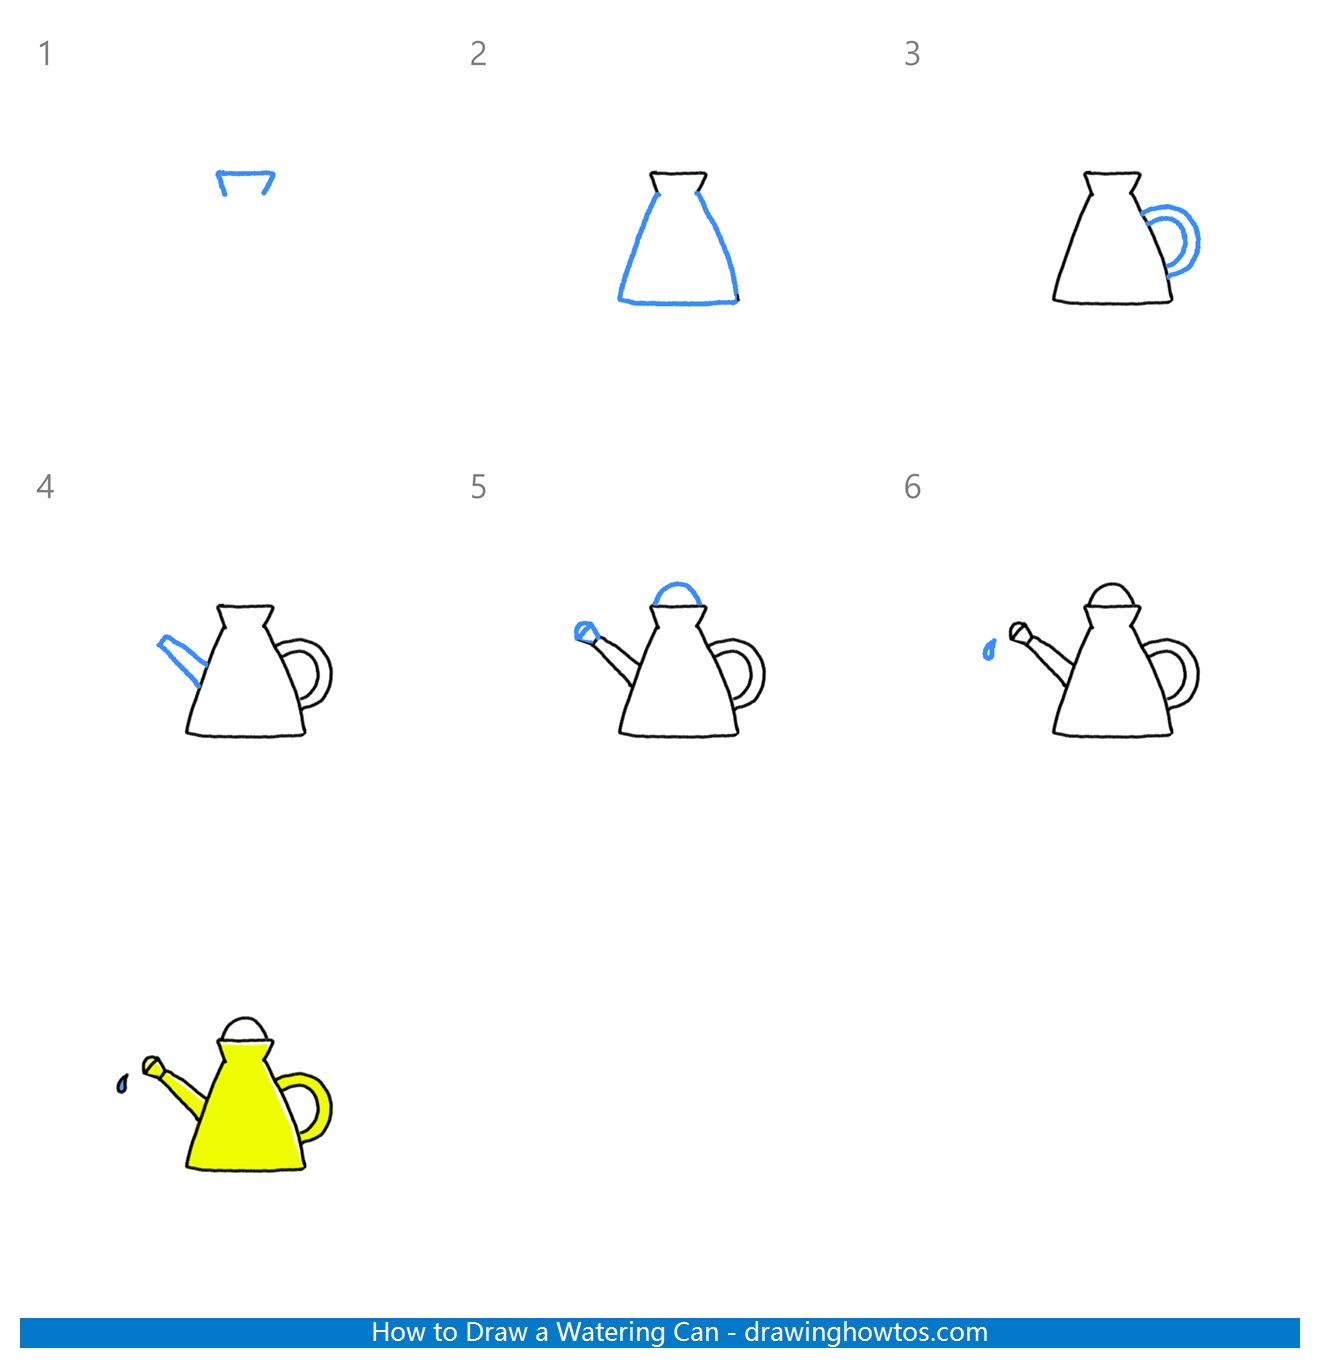 How to Draw a Watering Can Step by Step